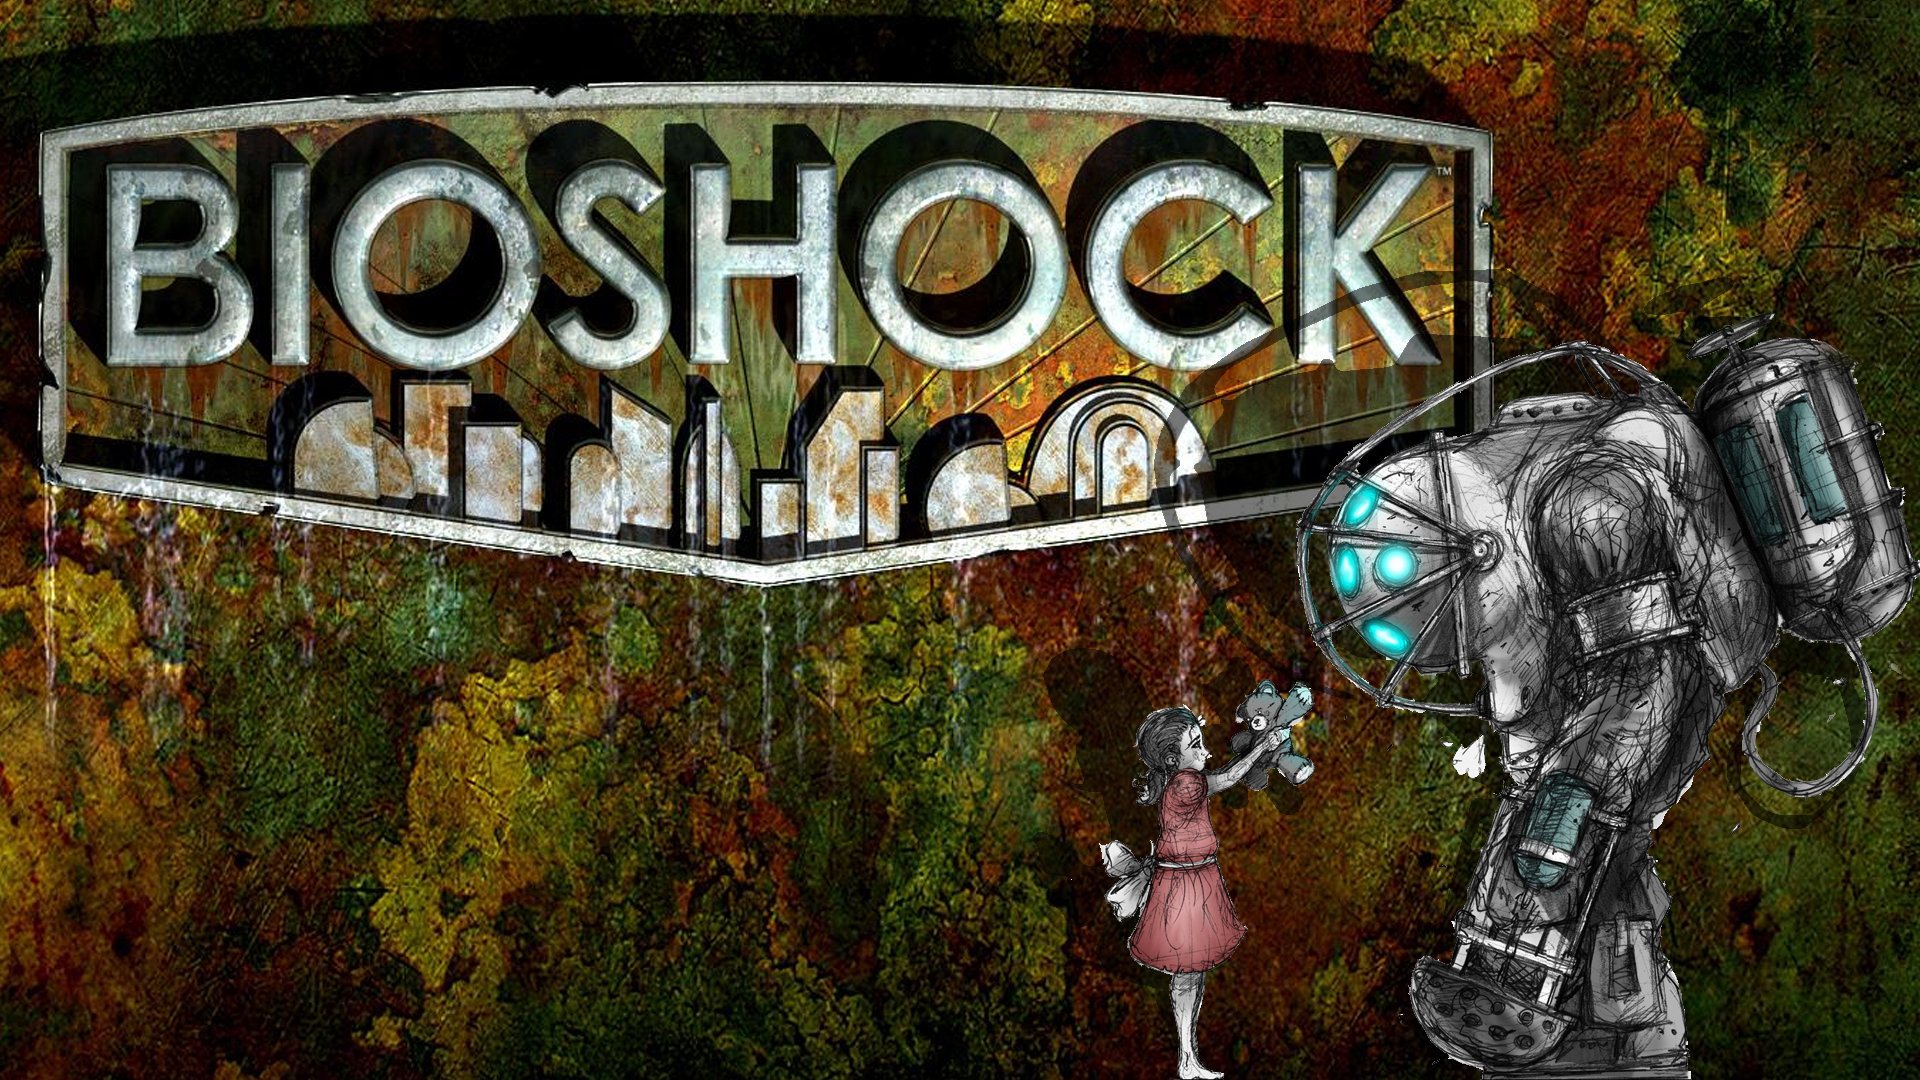 Download 1080p Bioshock PC background ID:394464 for free